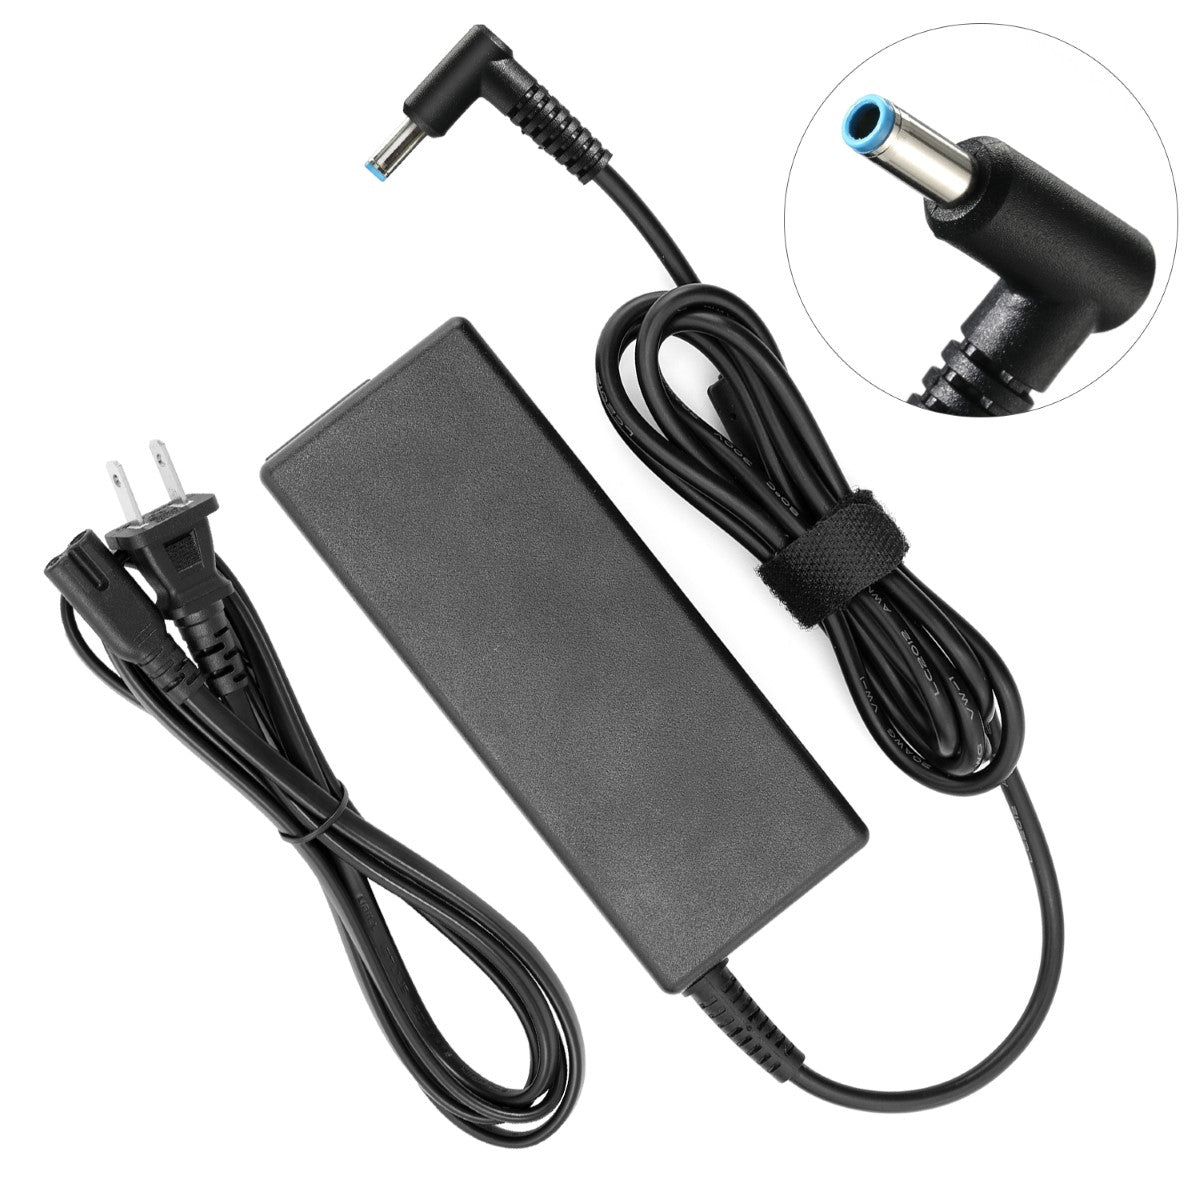 AC Adapter Charger for HP 15-g010dx Notebook (F9H95UA).